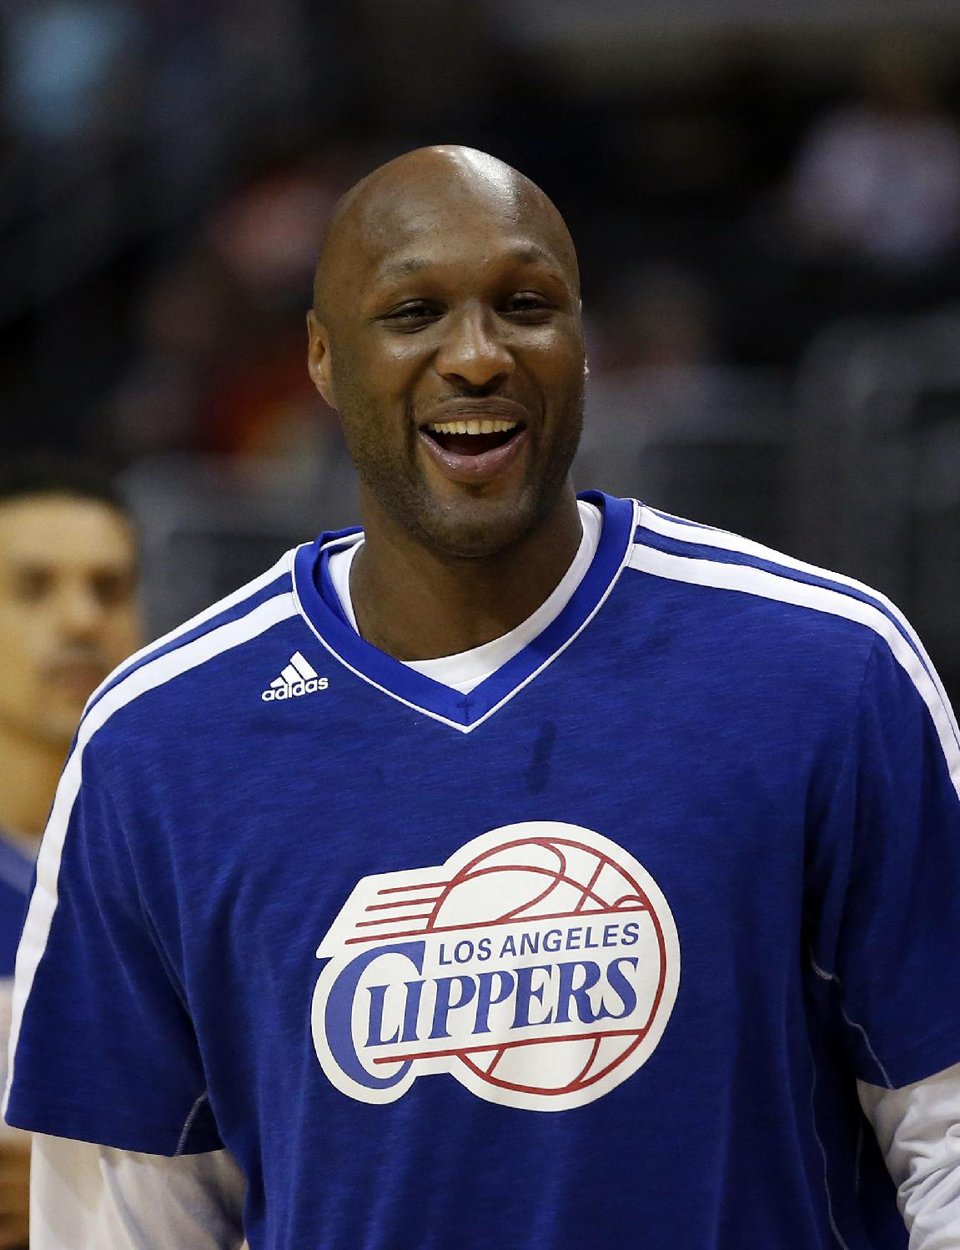 NBA’s Lamar Odom arrested for DUI in Los Angeles | Inquirer Sports